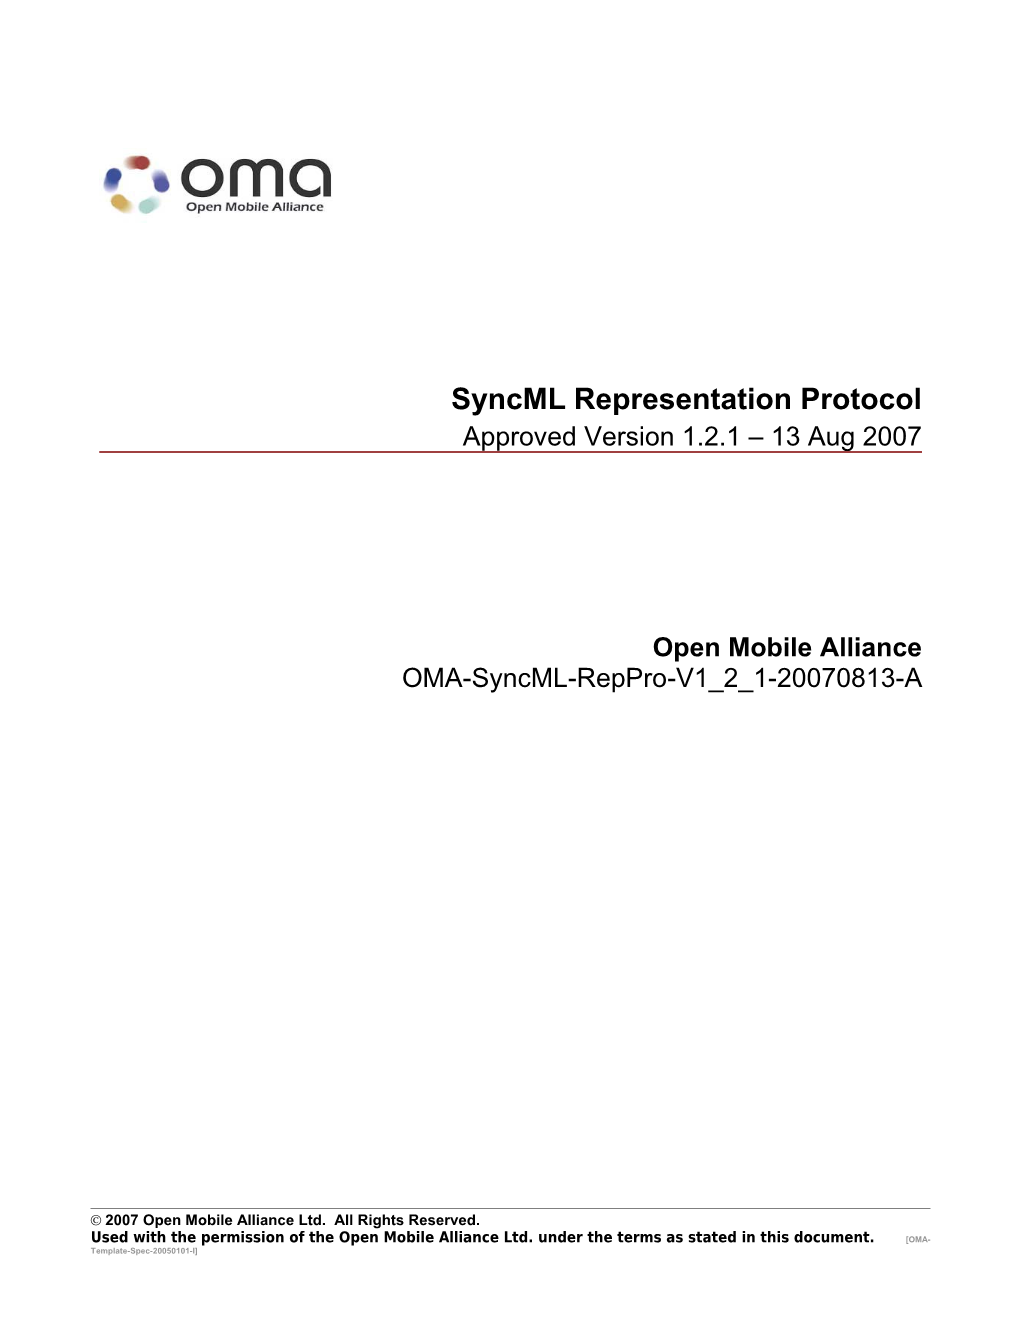 OMA-Syncml-Reppro-V1 2 1-20070813-A Page 49 V(60)